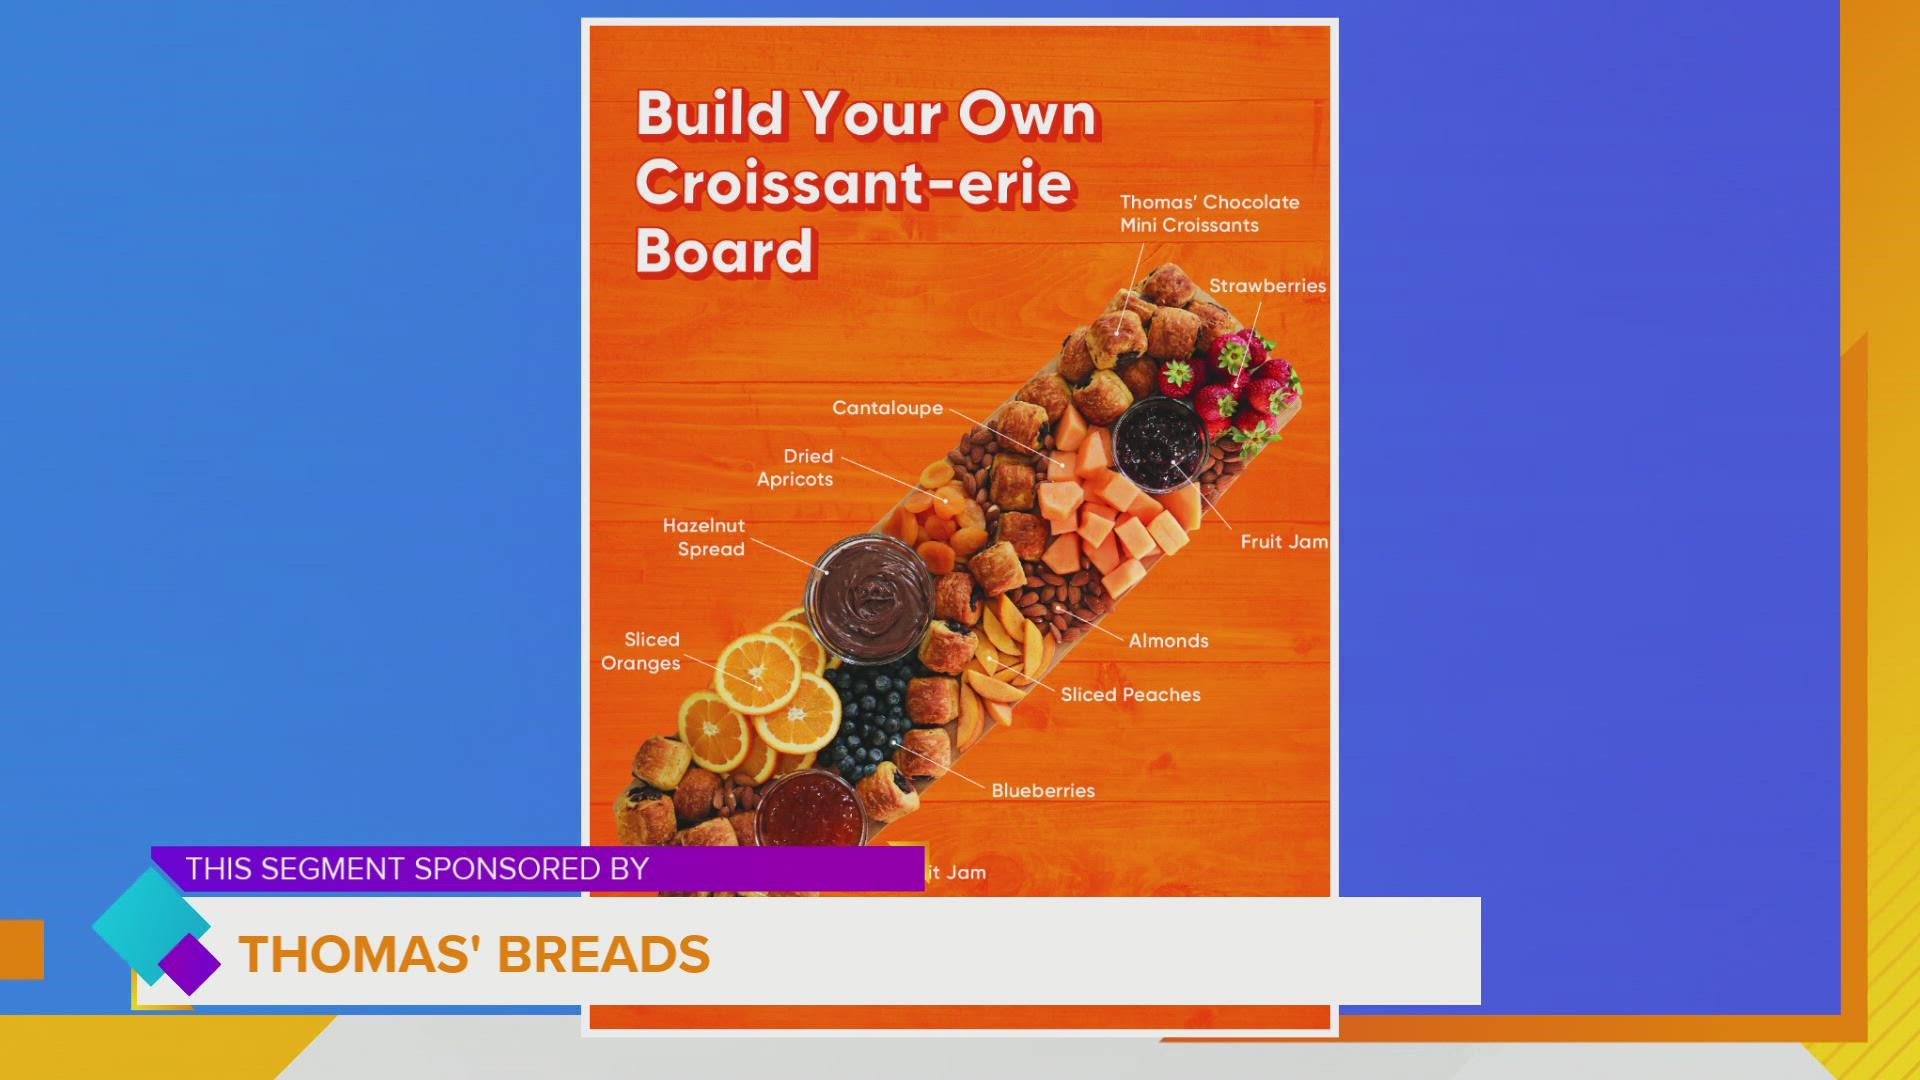 Chef Aaron Byrd from Street Eats DSM introduces the NEW Thomas' Chocolatey Mini Croissants by creating a delicious "Croissant-erie" Board | Paid Content